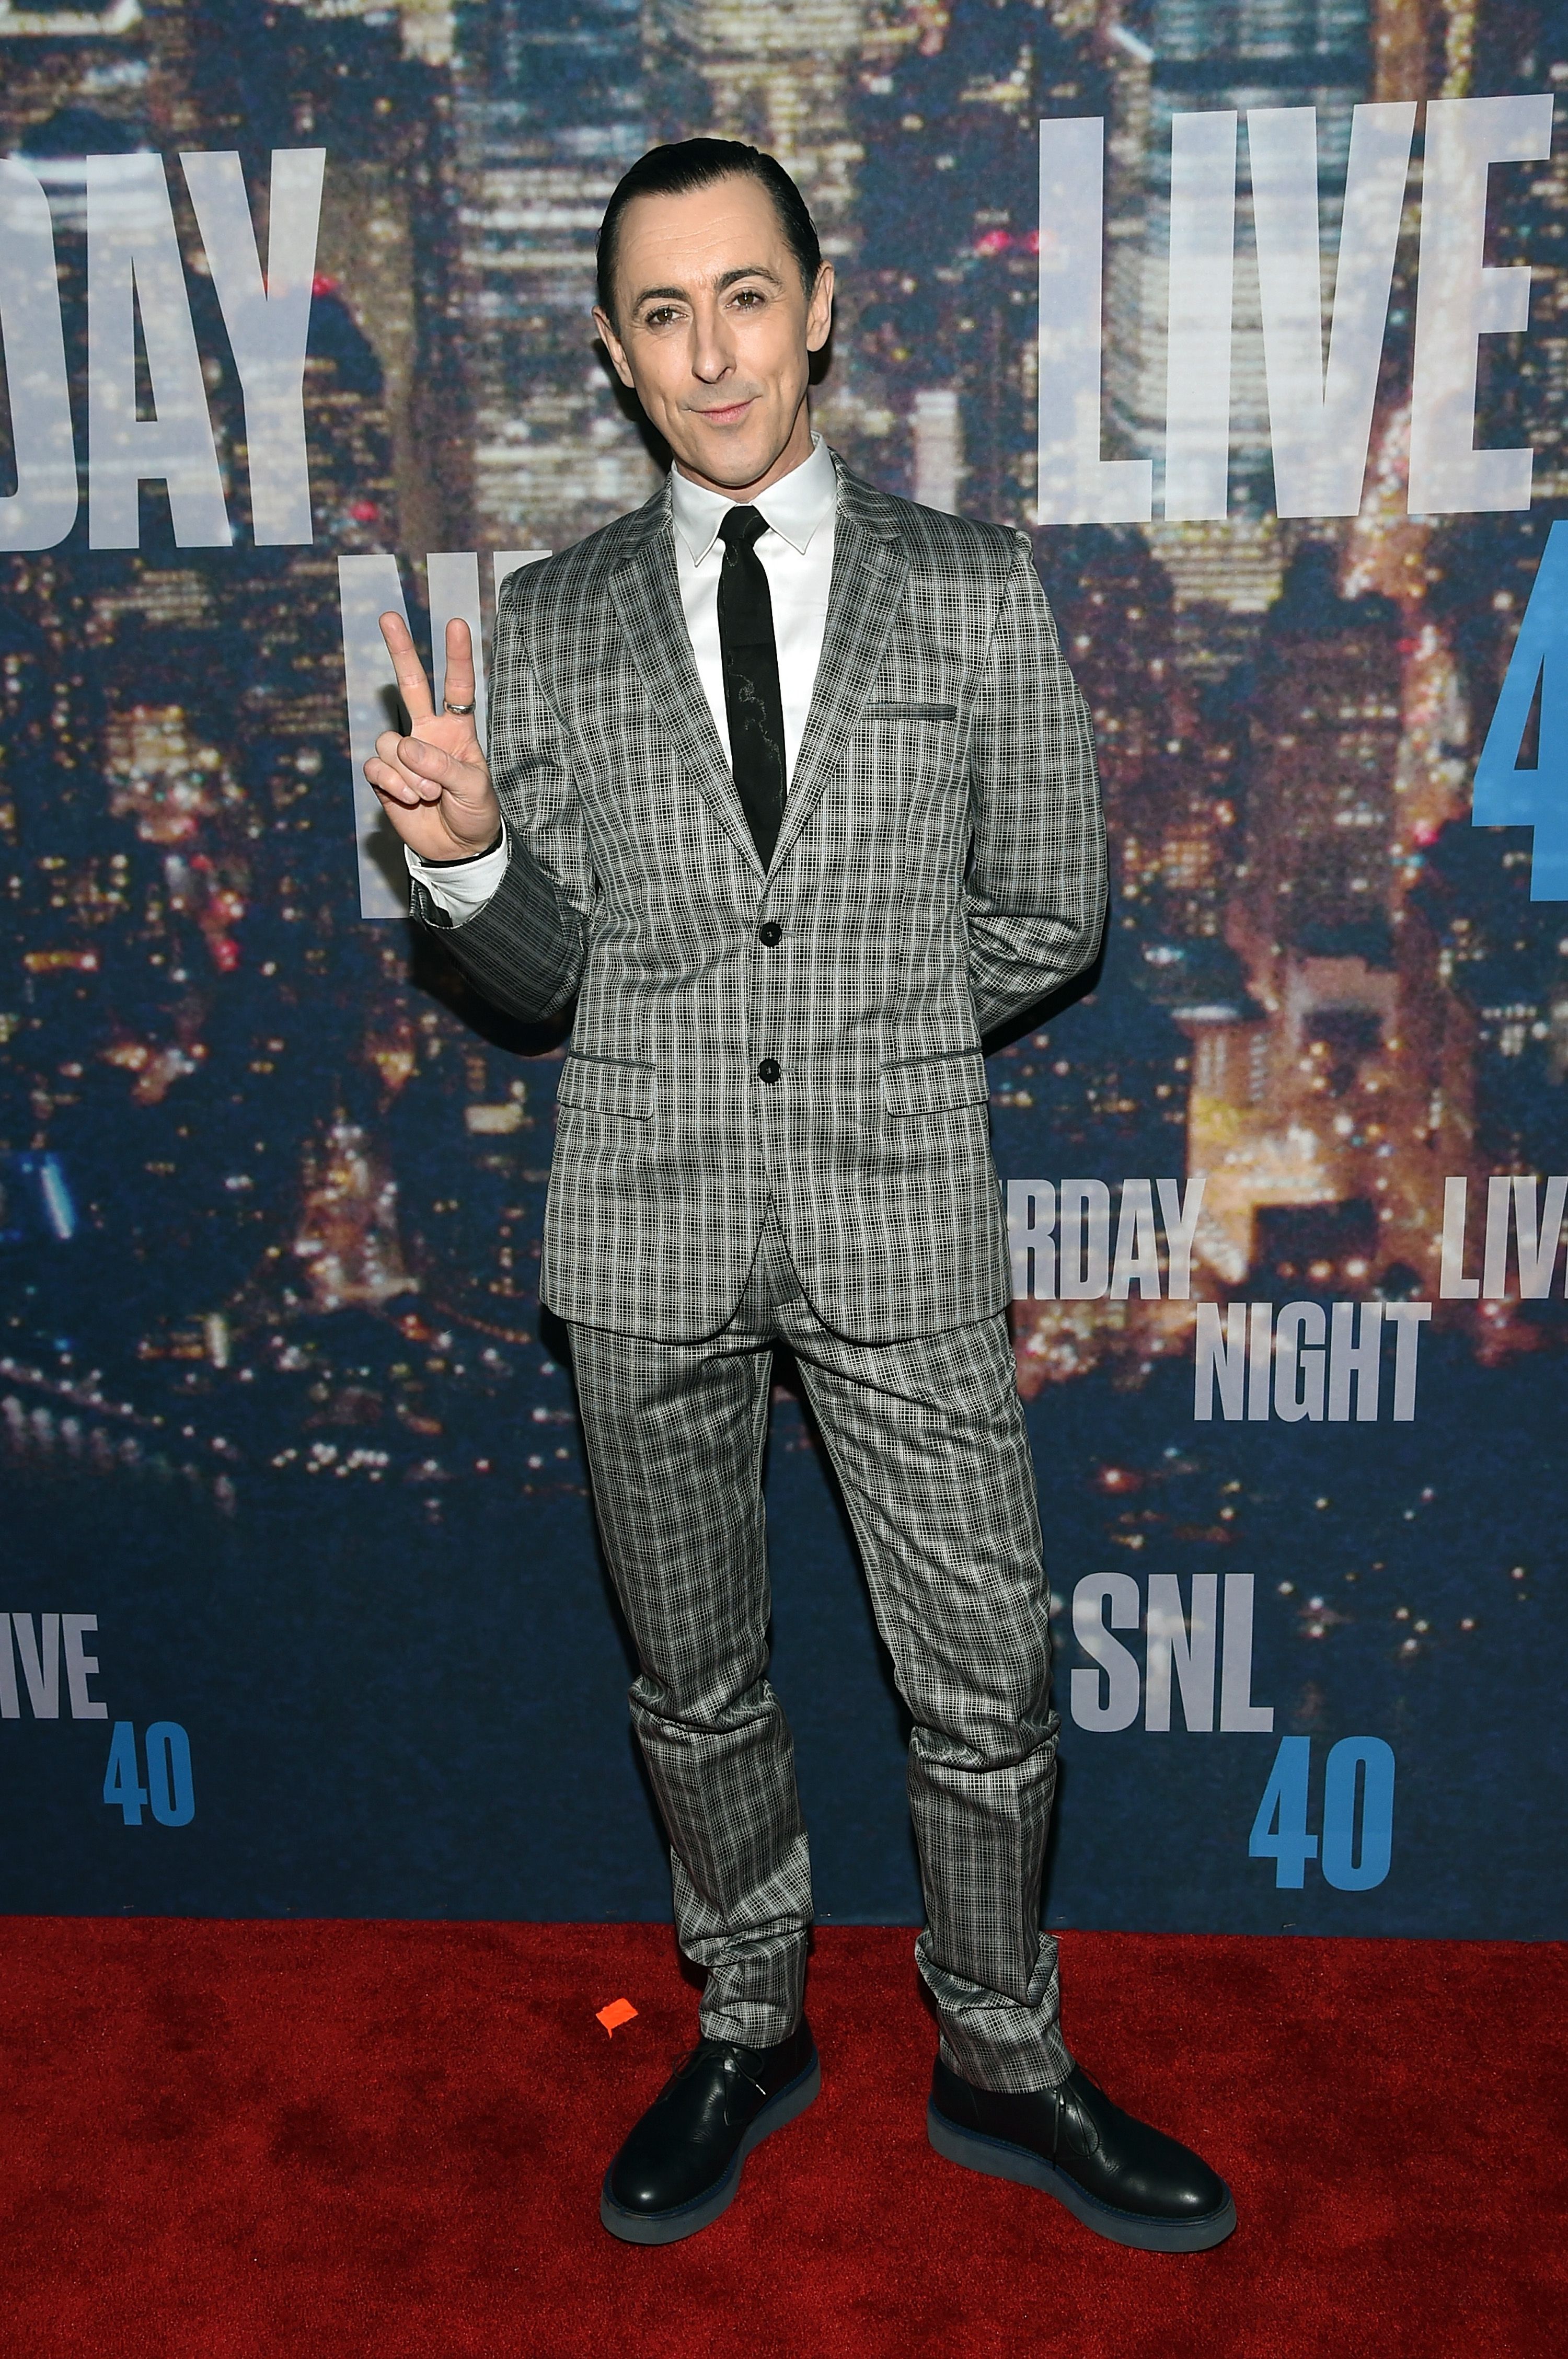 Alan Cumming during the SNL 40th Anniversary Celebration at Rockefeller Plaza on February 15, 2015, in New York City. | Source: Getty Images